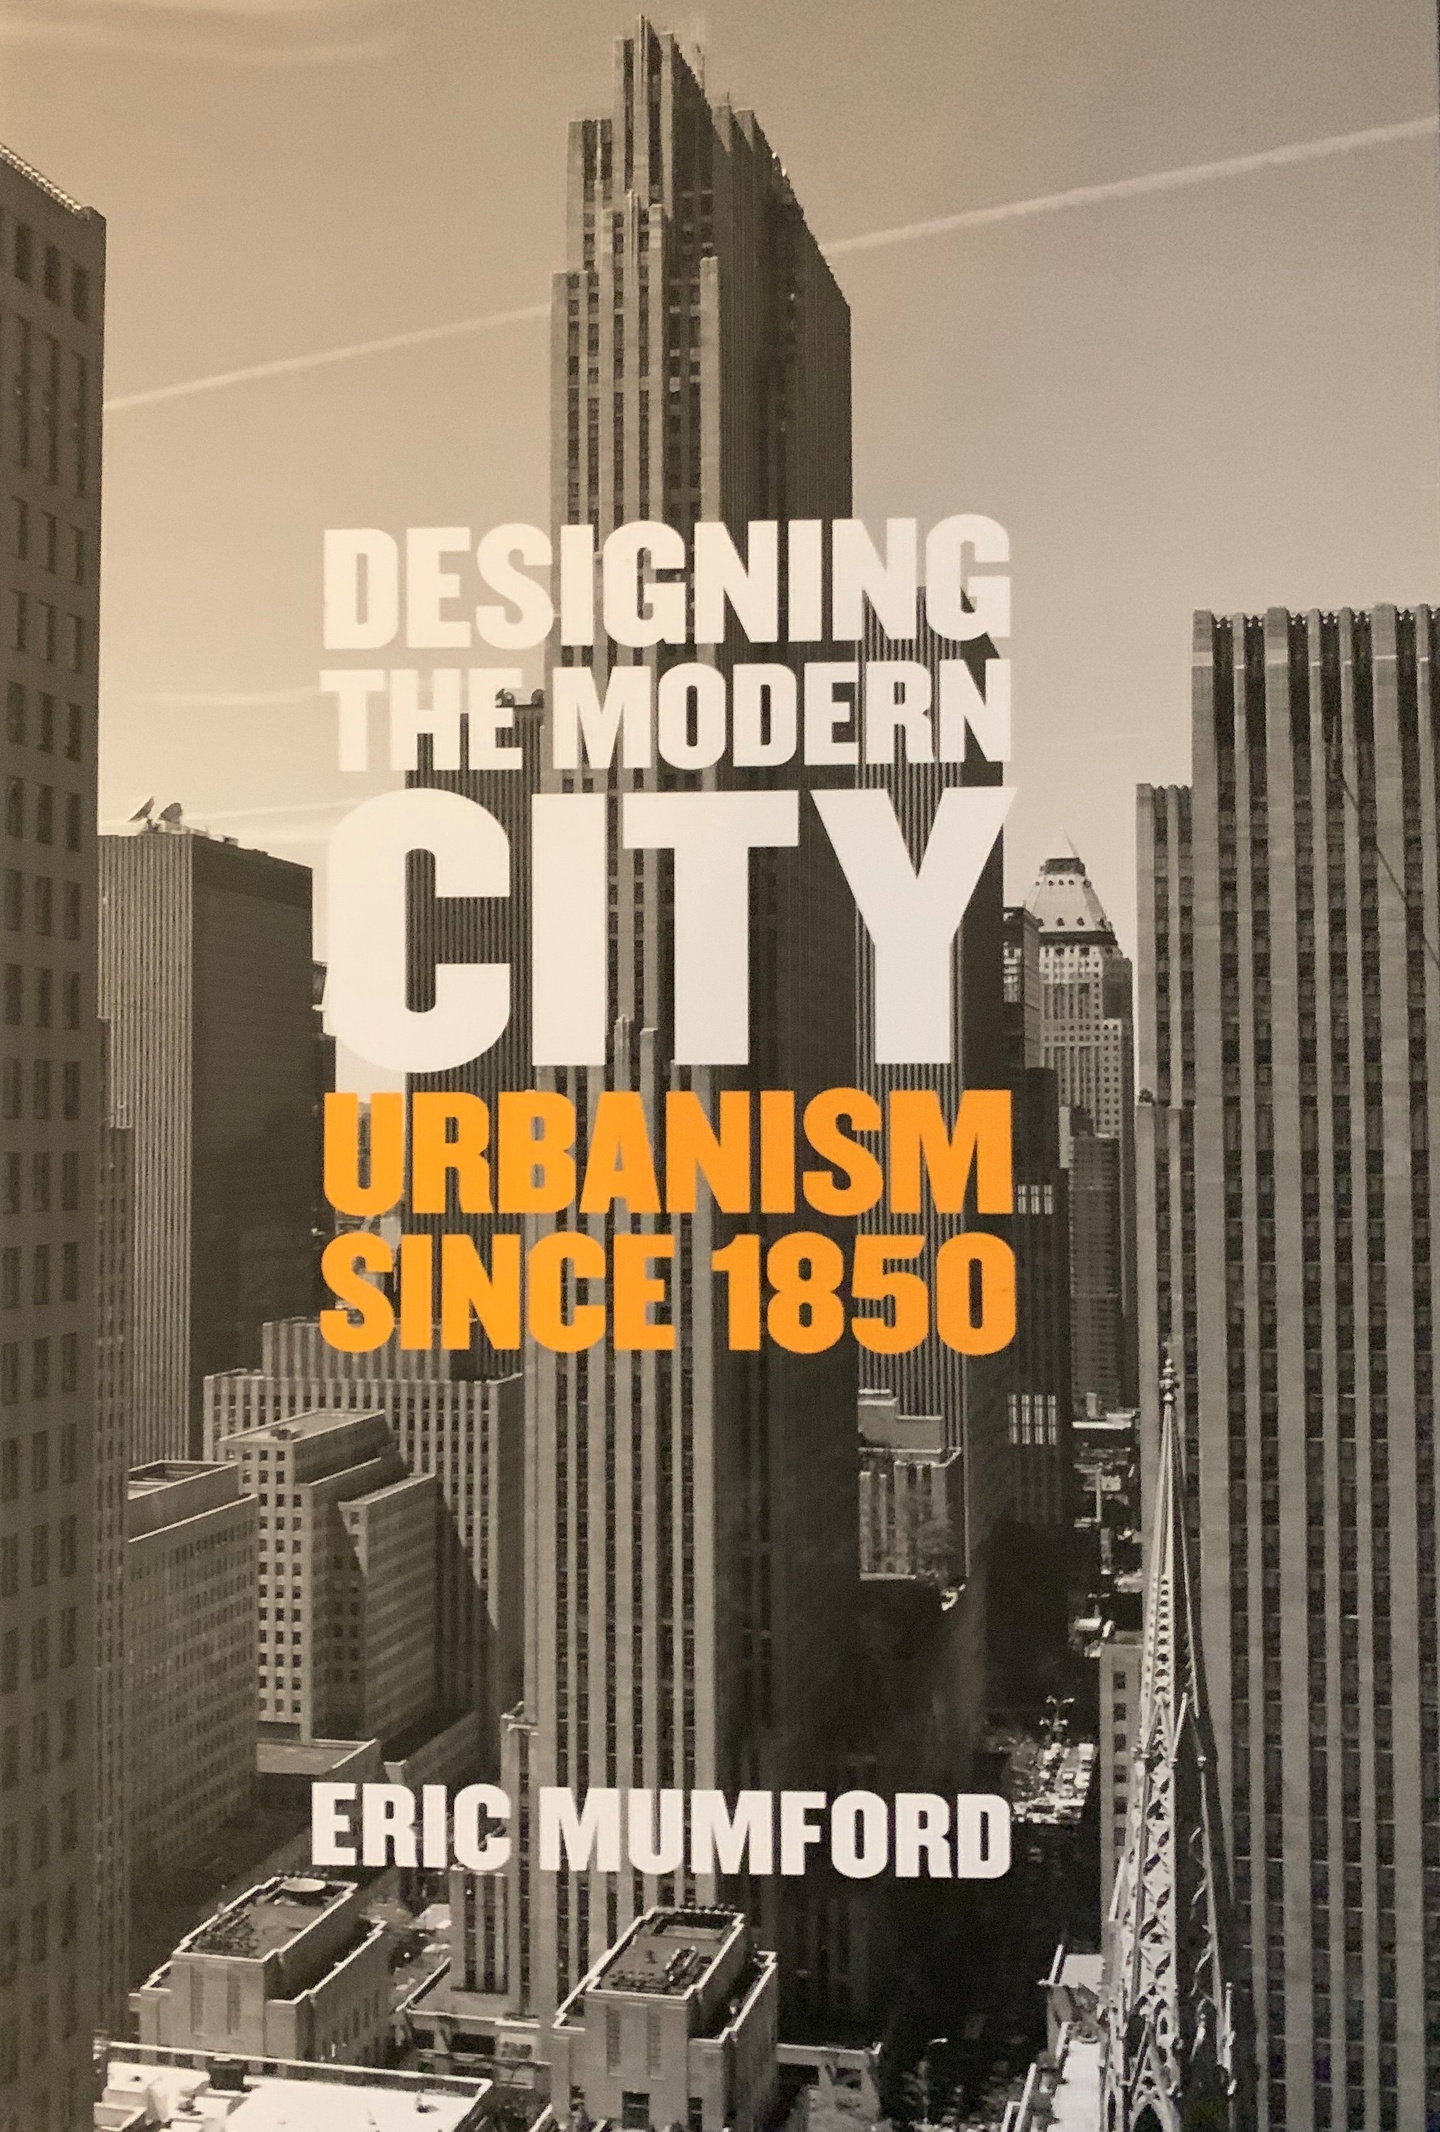 Cover of Designing the Modern City: Urbanism Since 1850, with a black-and-white photo of a cityscape with white and orange type over the top.